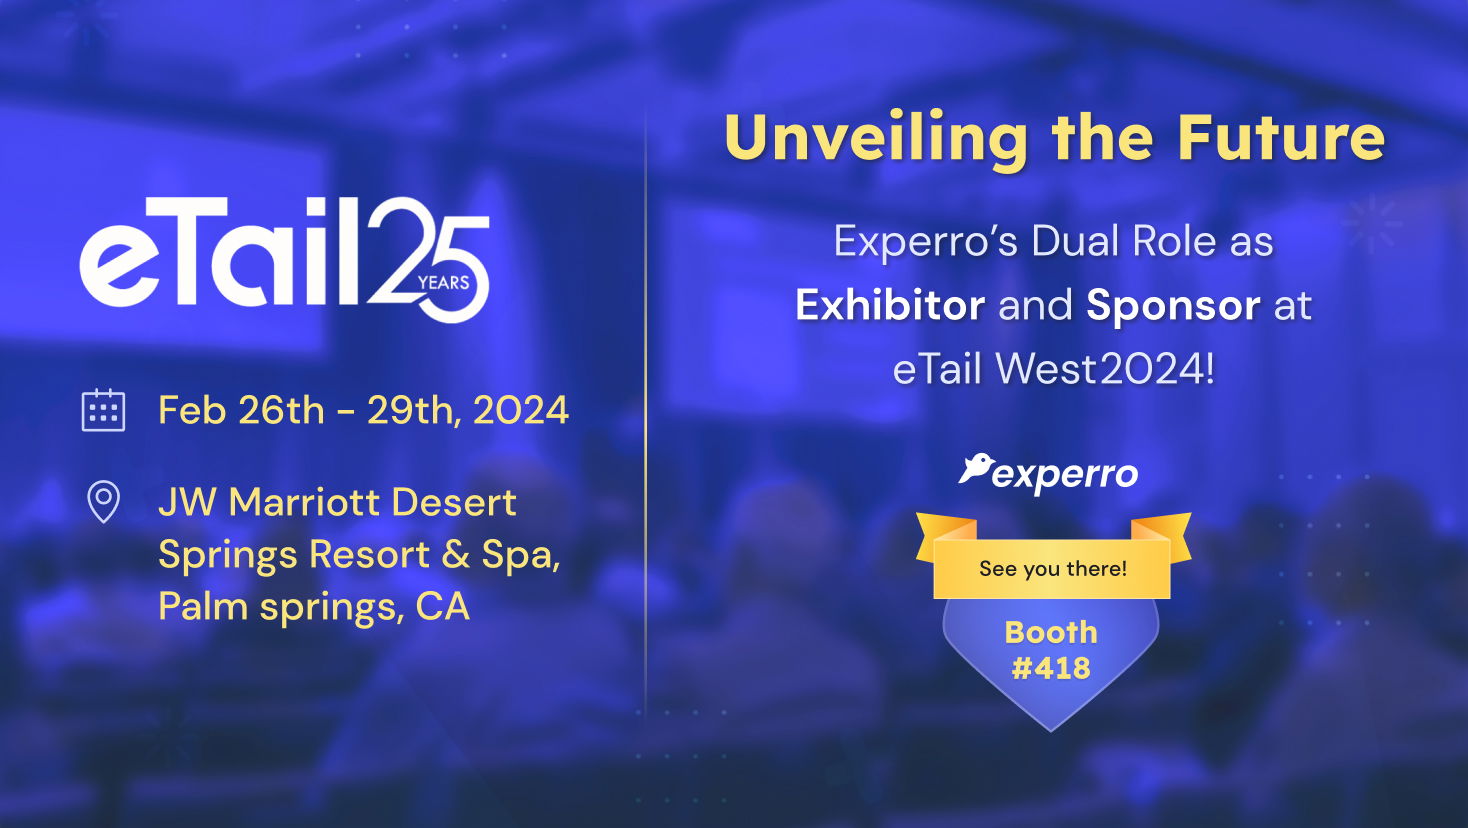 Join Us at eTail West 2024: Experro Leads the Way as Sponsor and Exhibitor!